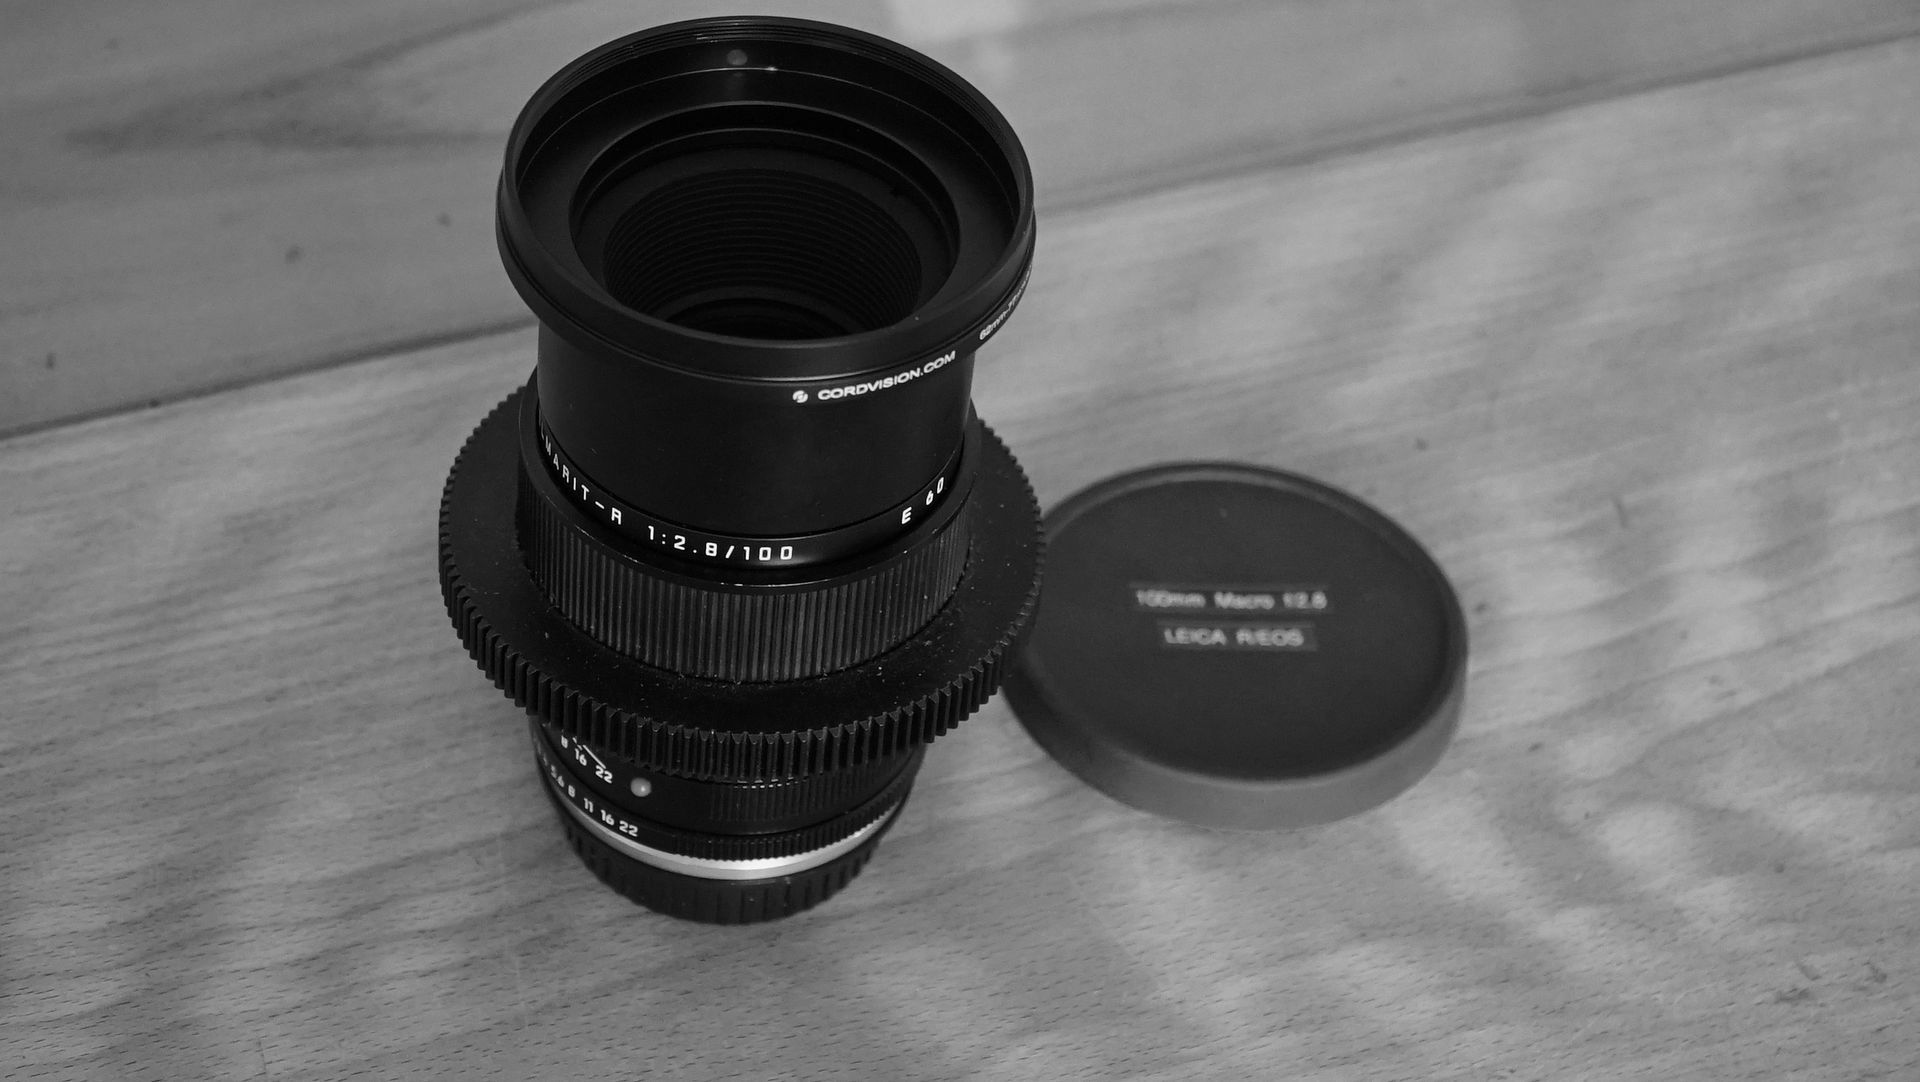 Leica 100mm f/2.8 Marco w/ Cine-Mod with Canon EF Mount